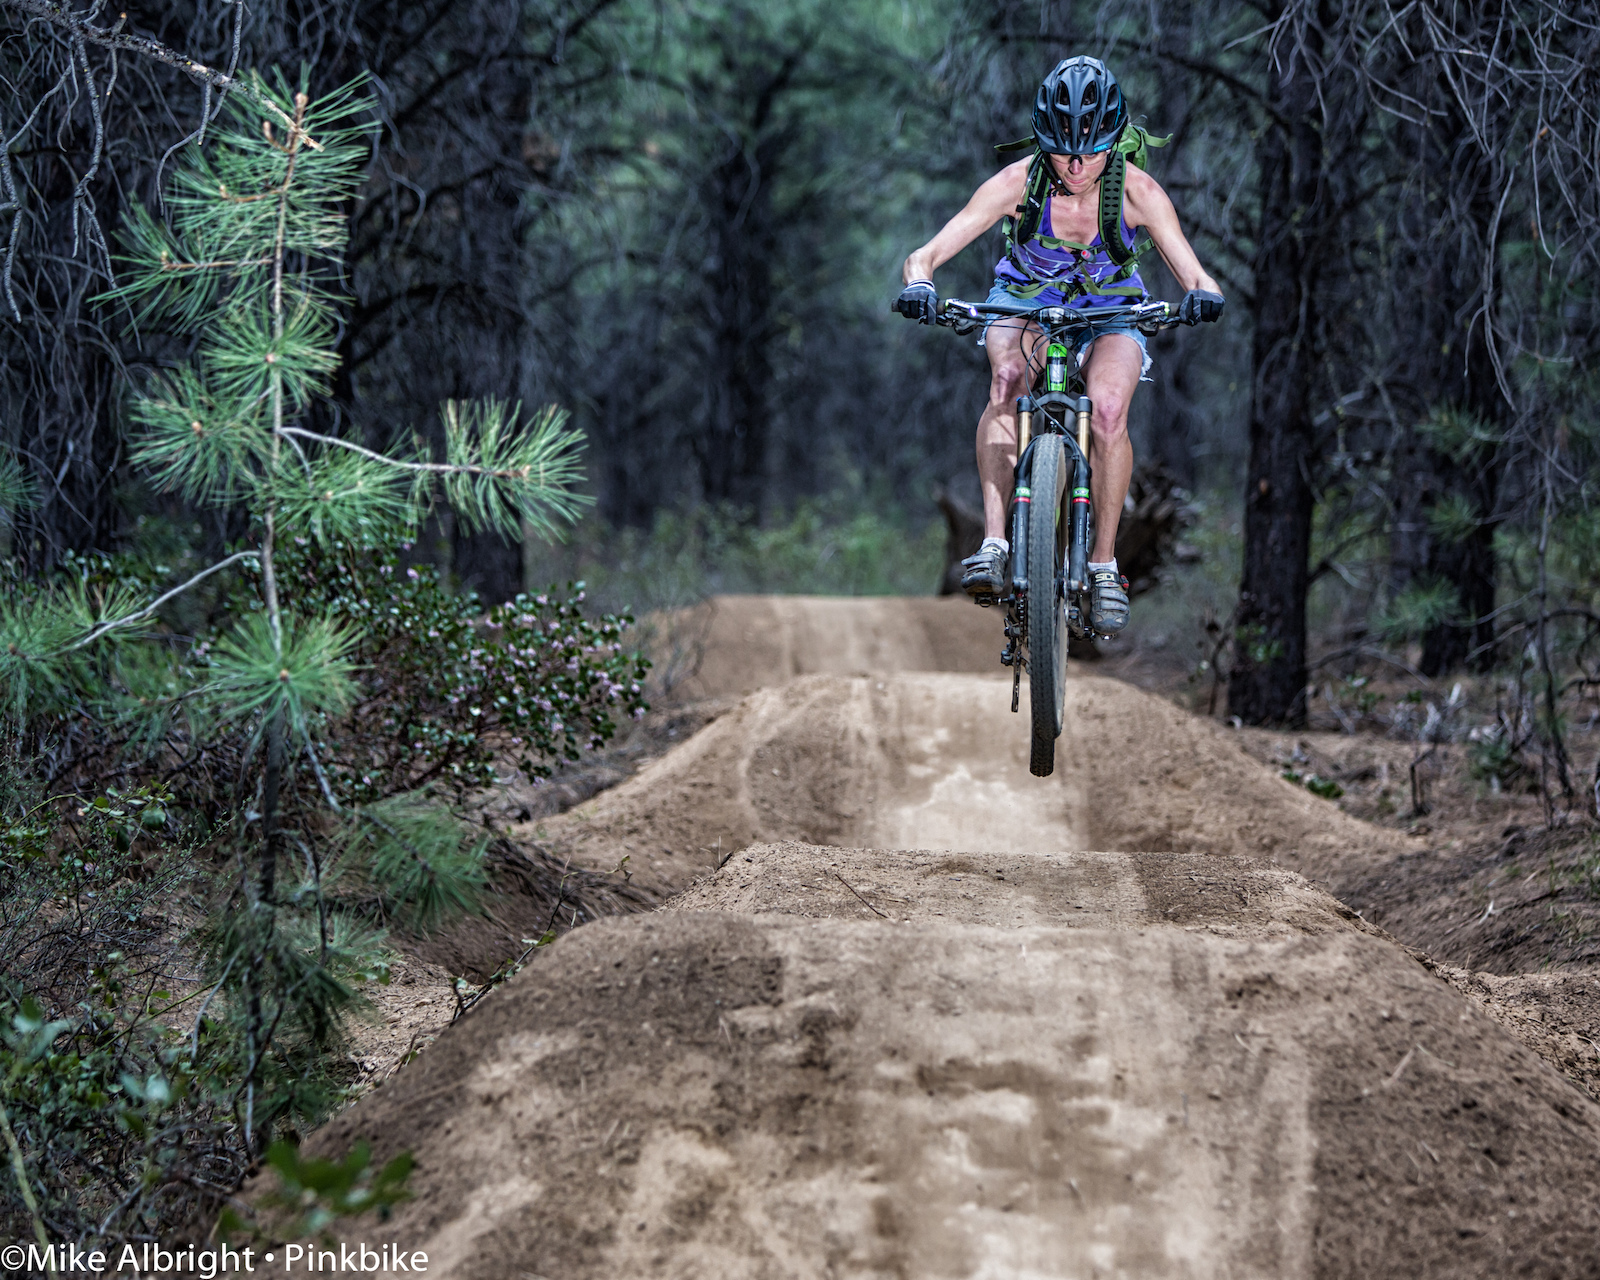 Friday "Happy Hour" at the Lower Whoops trail near Bend, Oregon.